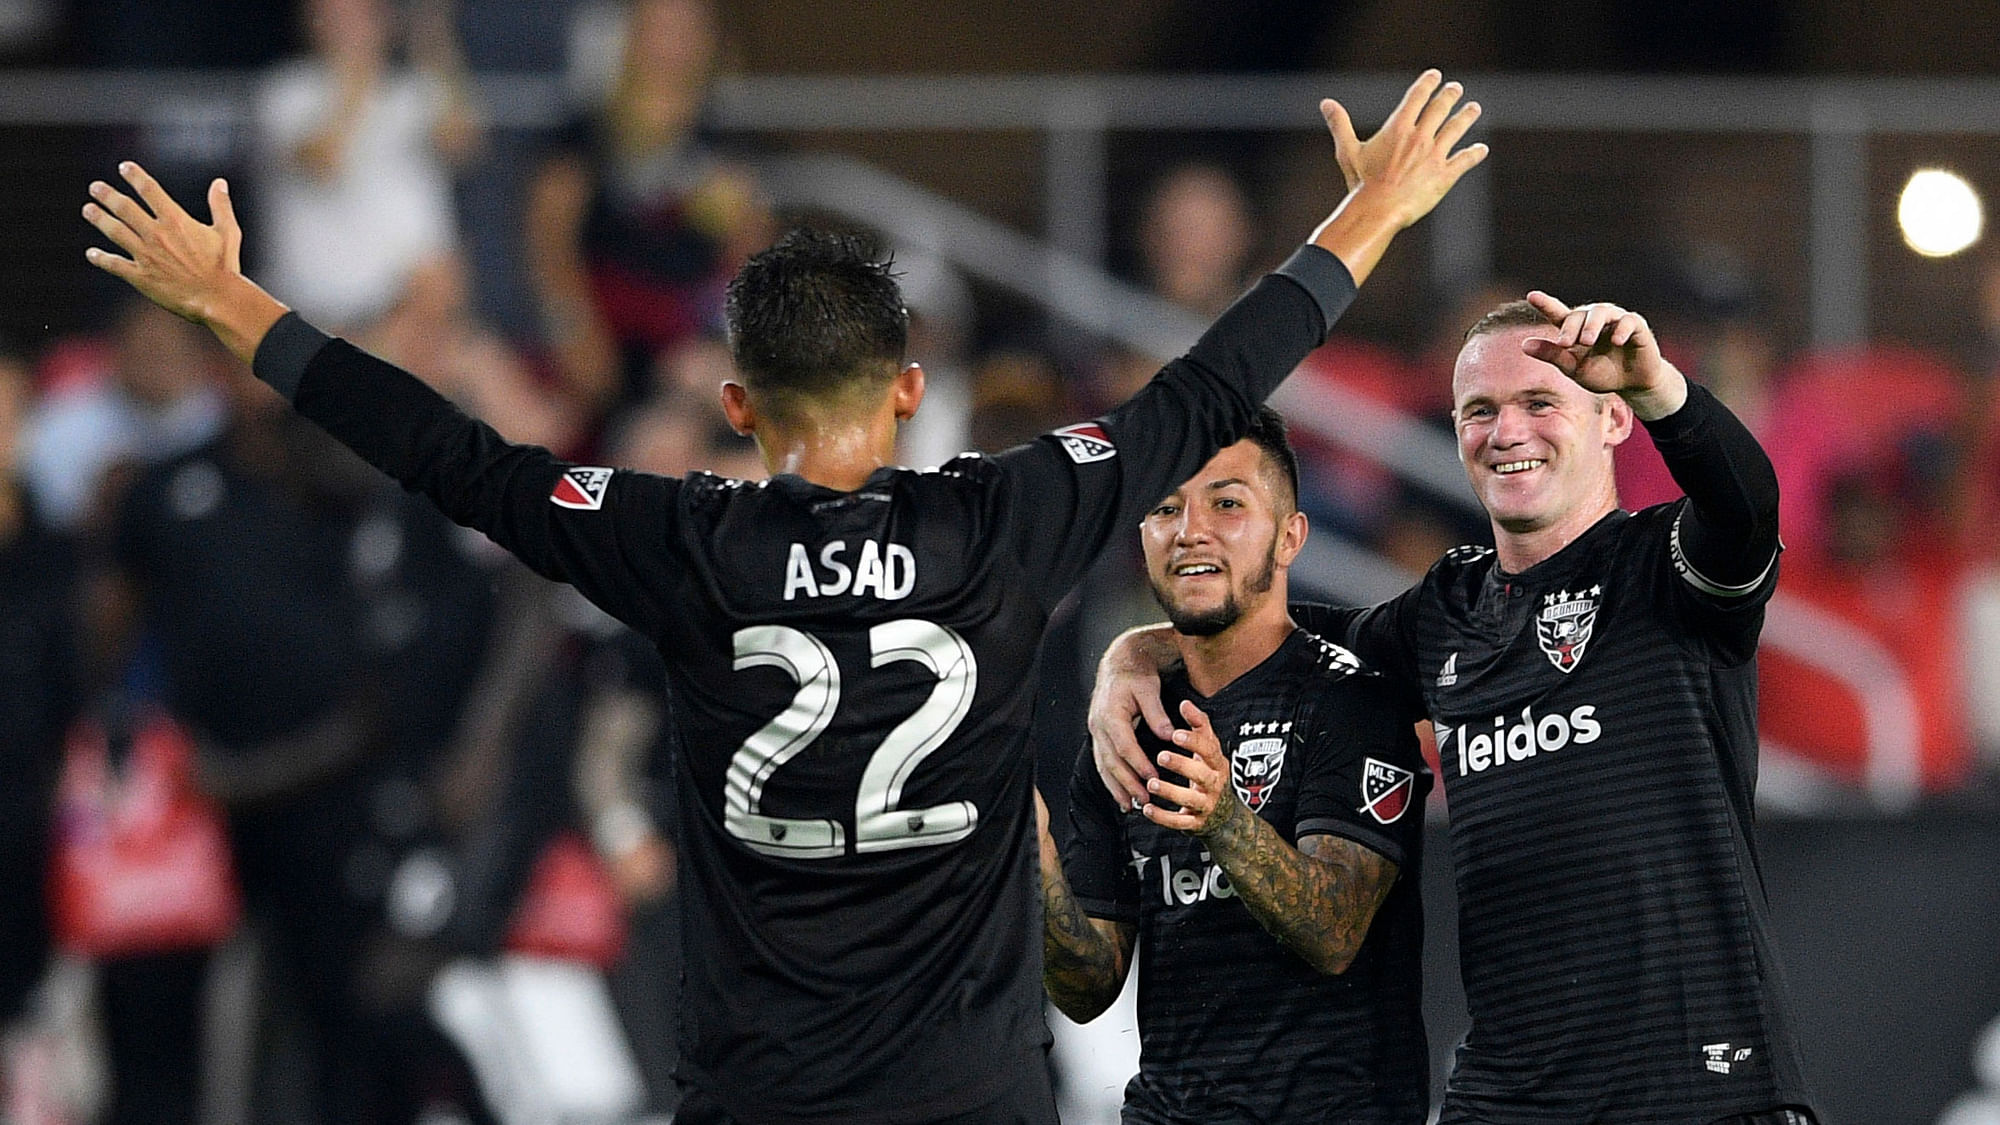 A moment of magic from Wayne Rooney fired DC United to a last-gasp 3-2 victory over Orlando in Major League Soccer on Sunday.